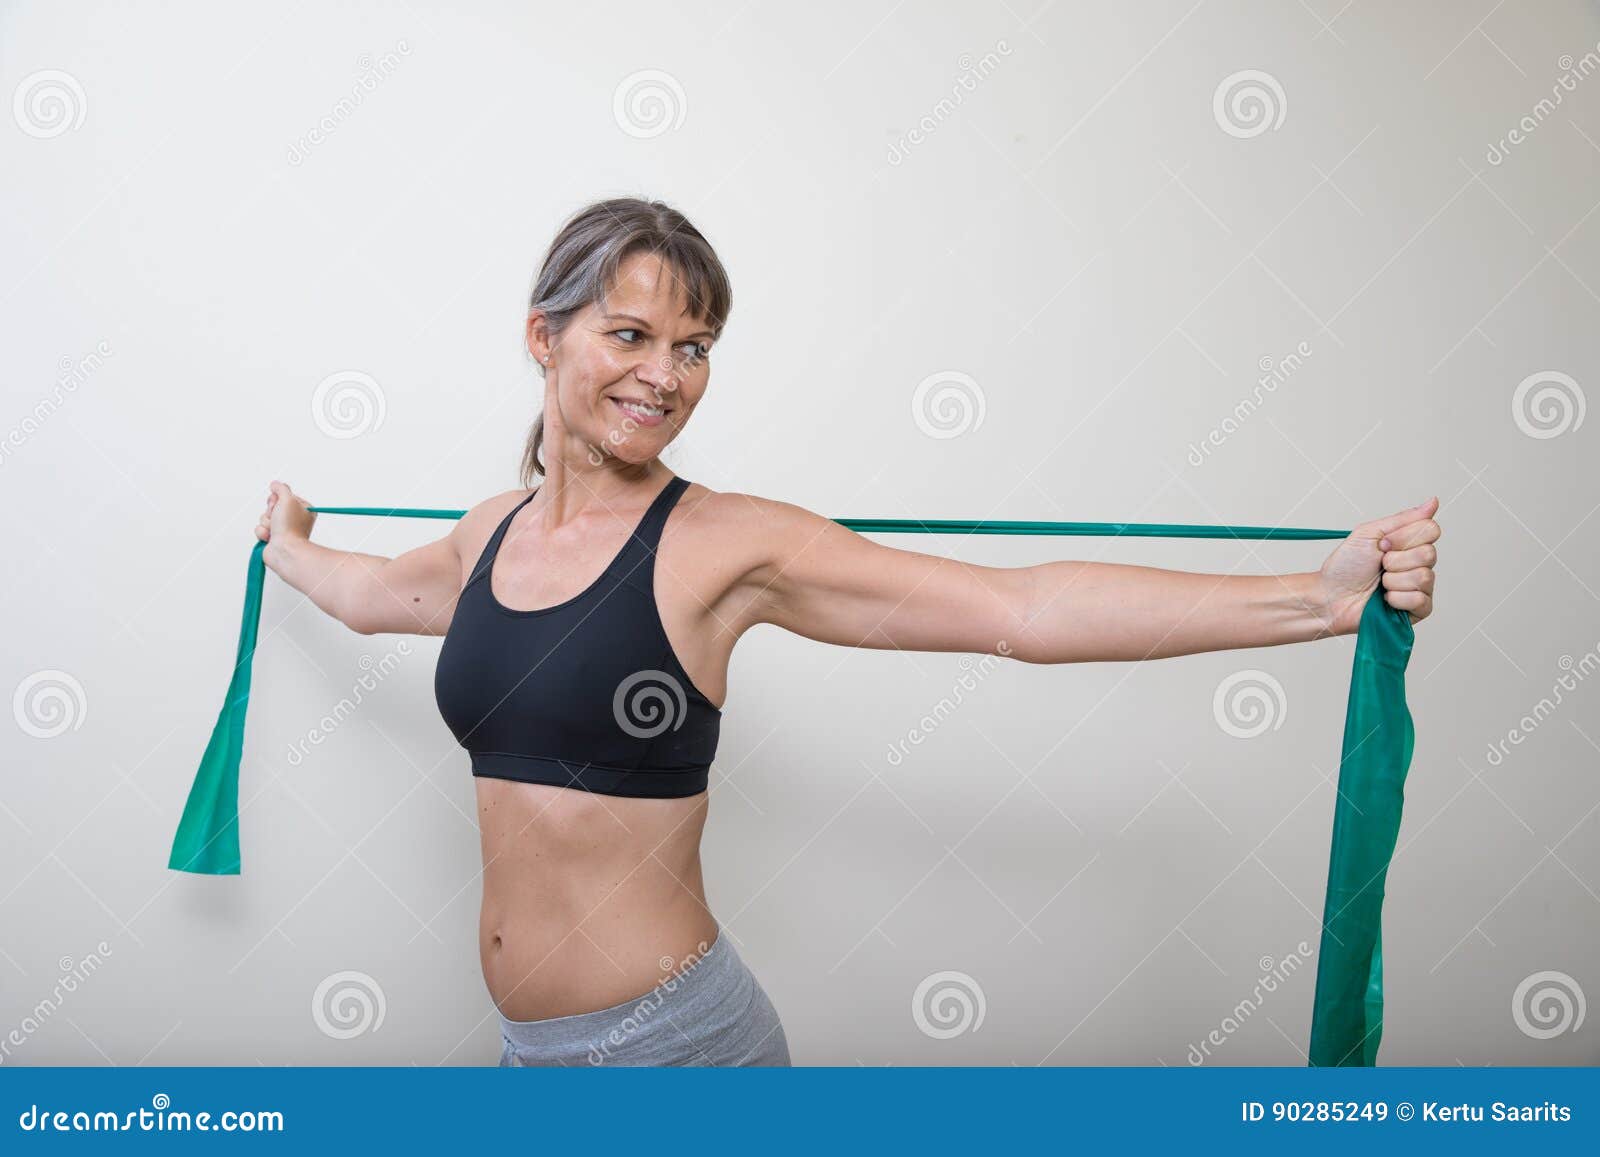 Middle-aged woman posing in bra and jeans stock photo (219986